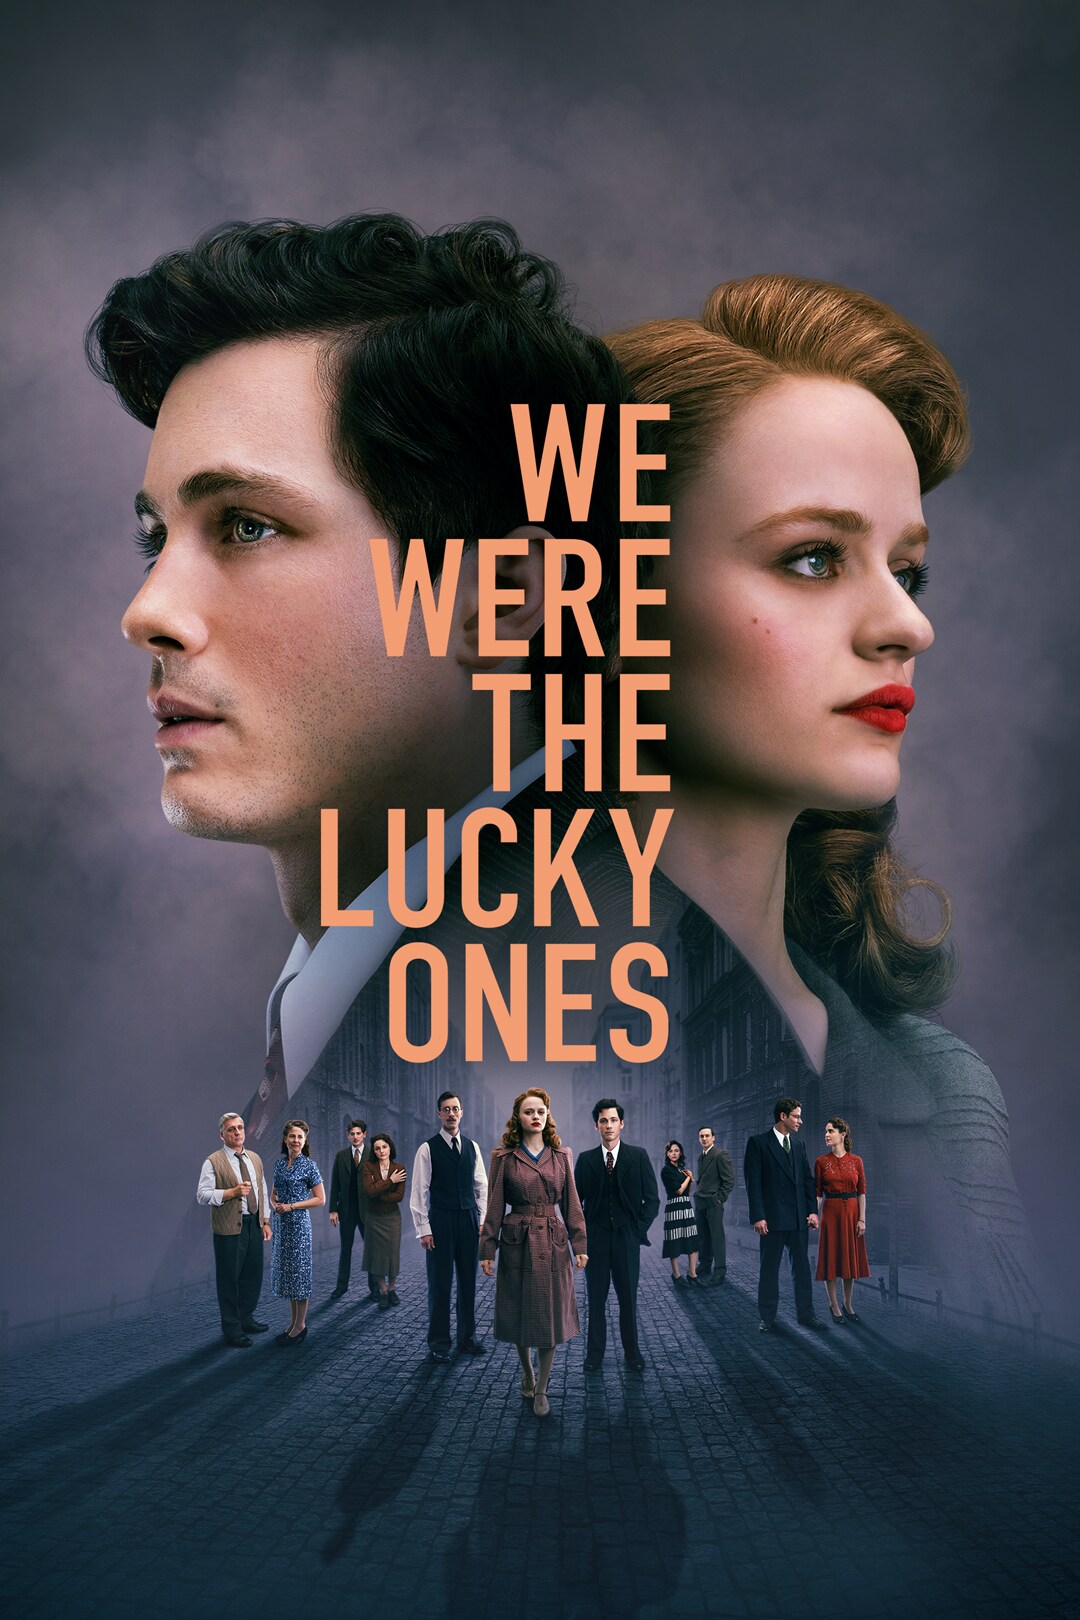 We Were The Lucky Ones is now streaming on Disney+